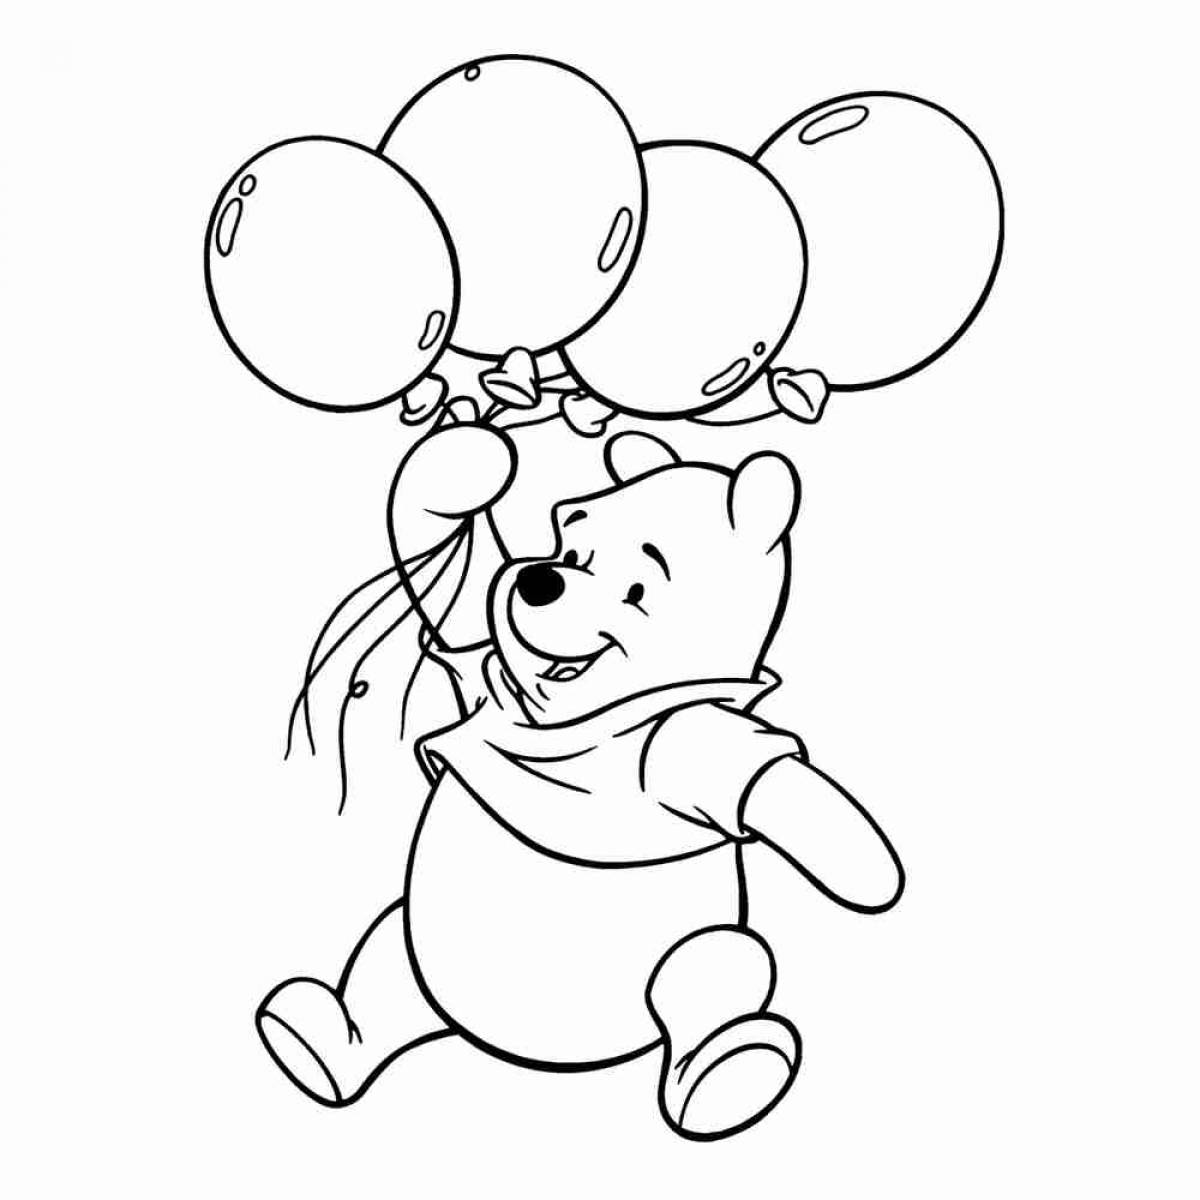 Winnie the pooh with balloon #16